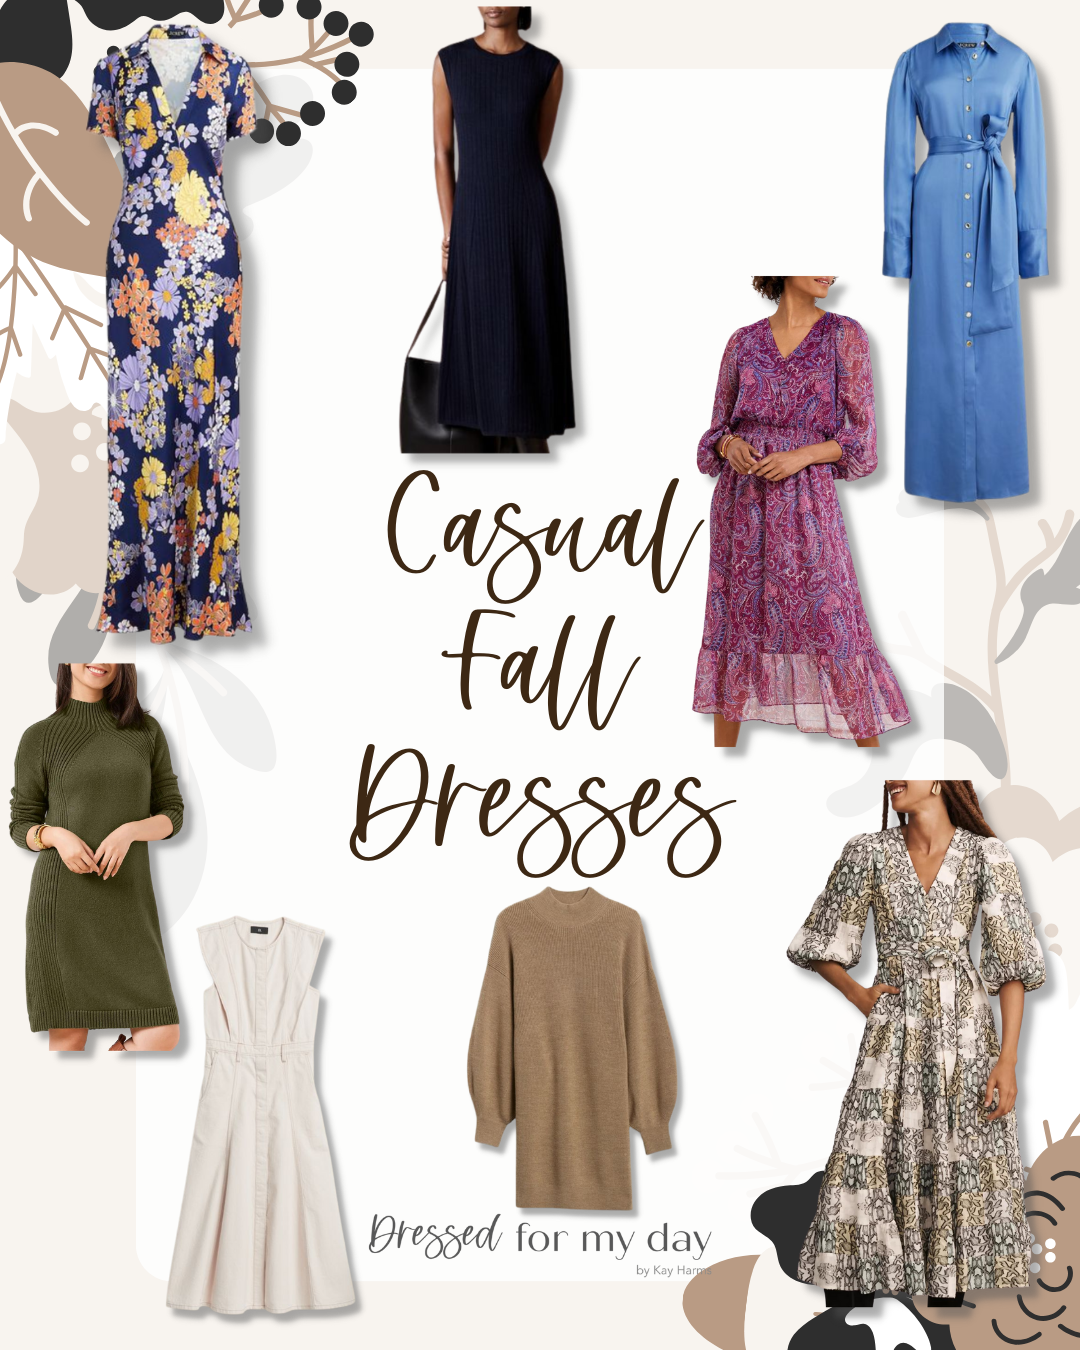 Casual Fall Dresses - Dressed for My Day